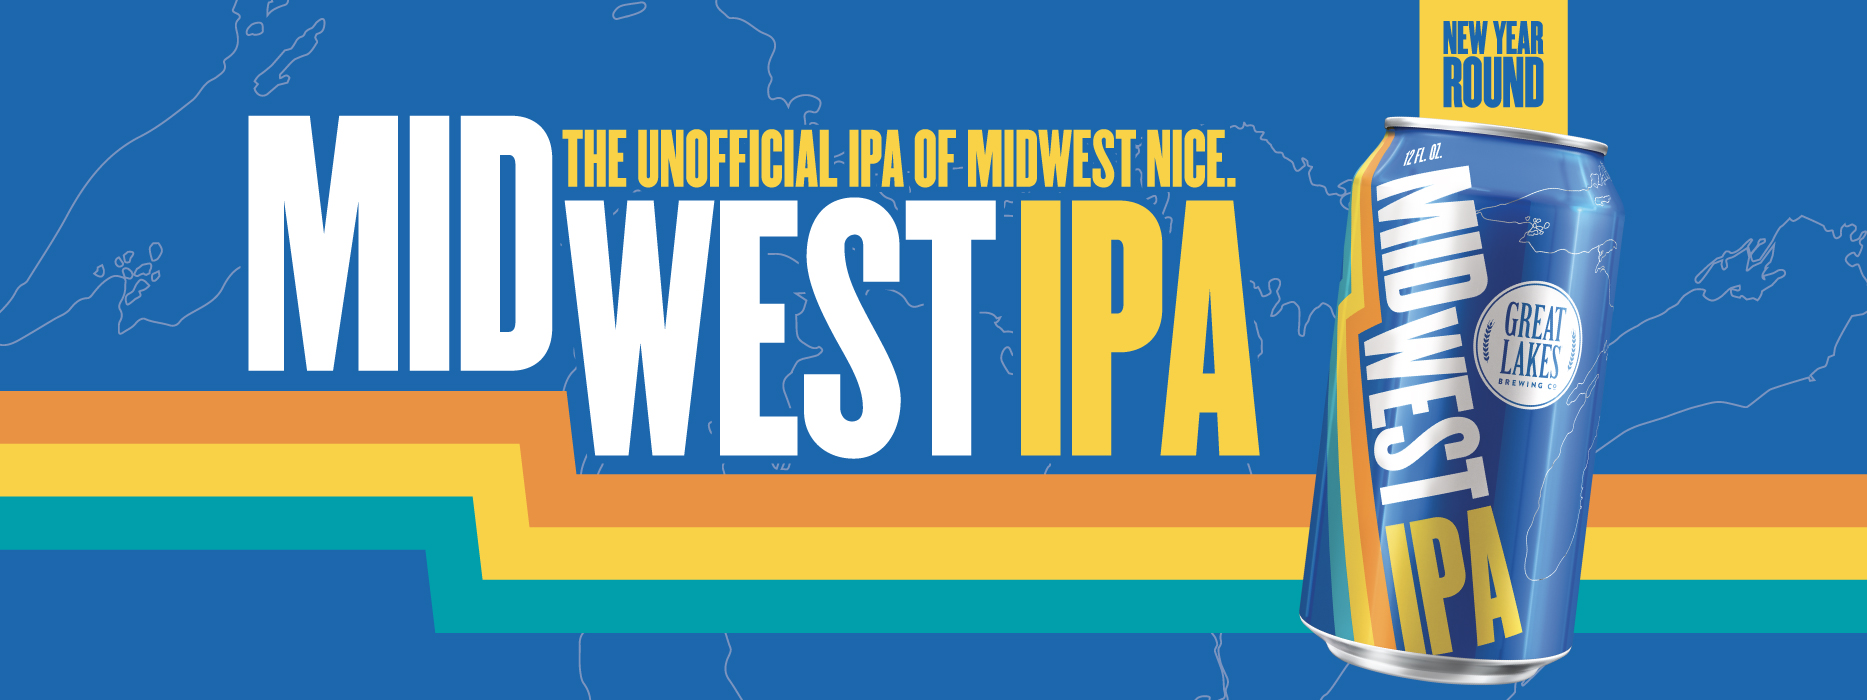 Midwest IPA 12 ounce can with text reading Midwest IPA the Unofficial IPA of Midwest Nice, new year-round